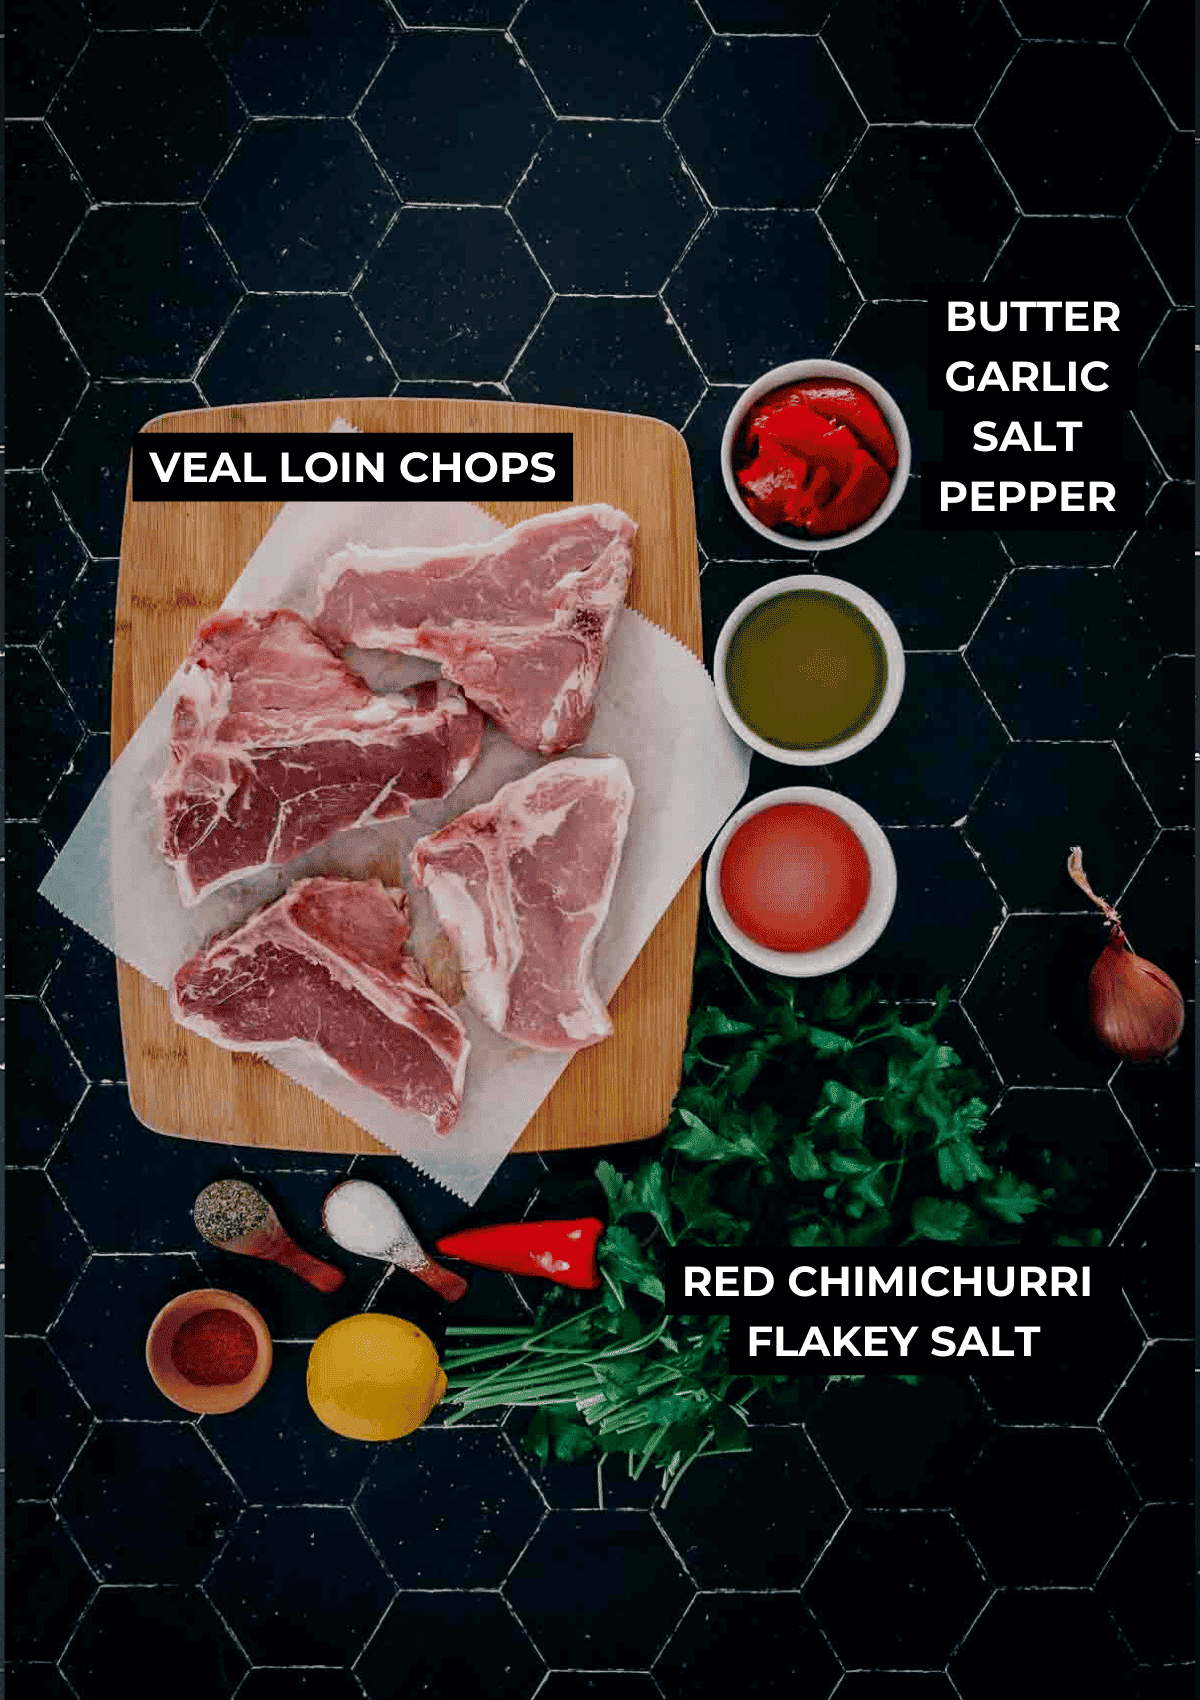 Ingredients for pan seared veal loin chops recipe. 